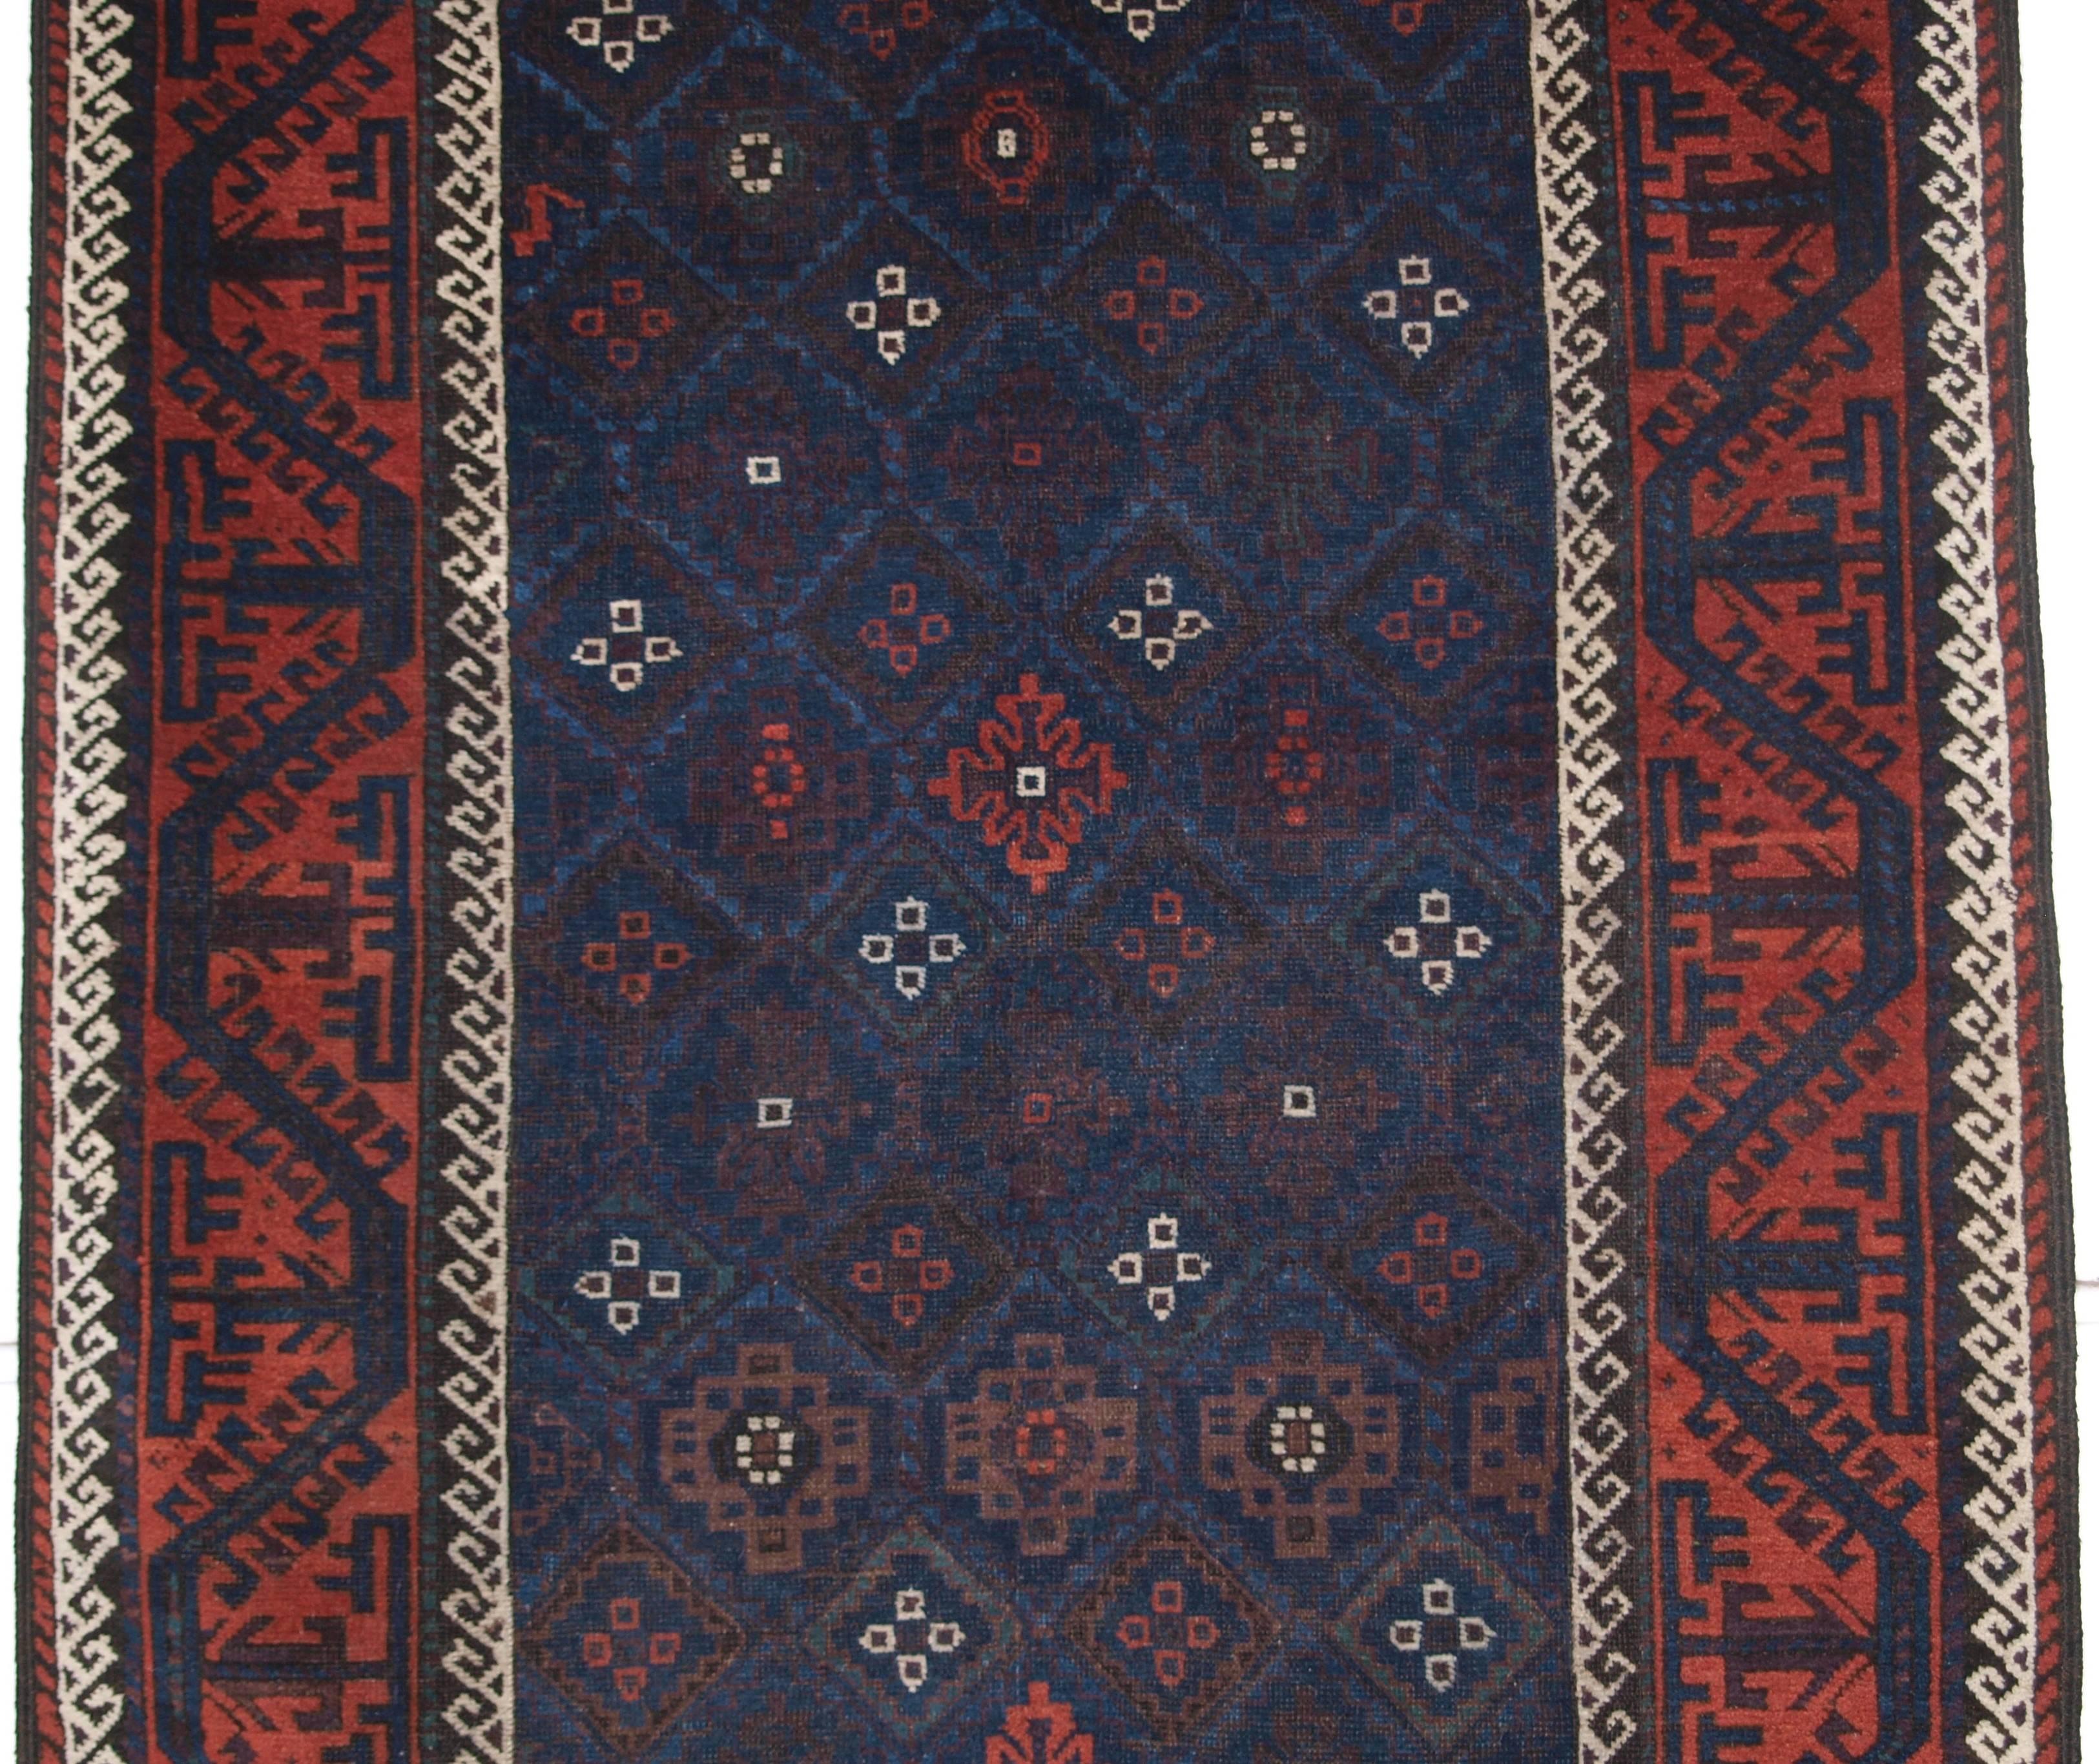 Size: 6ft 11in x 3ft 8in (212 x 112cm).

Antique baluch rug from Western Afghanistan / Eastern Persia. A Baluch rug with a very unusual lattice design in blue,

circa 1880.

A superb Baluch rug with a diamond lattice design with mina khani